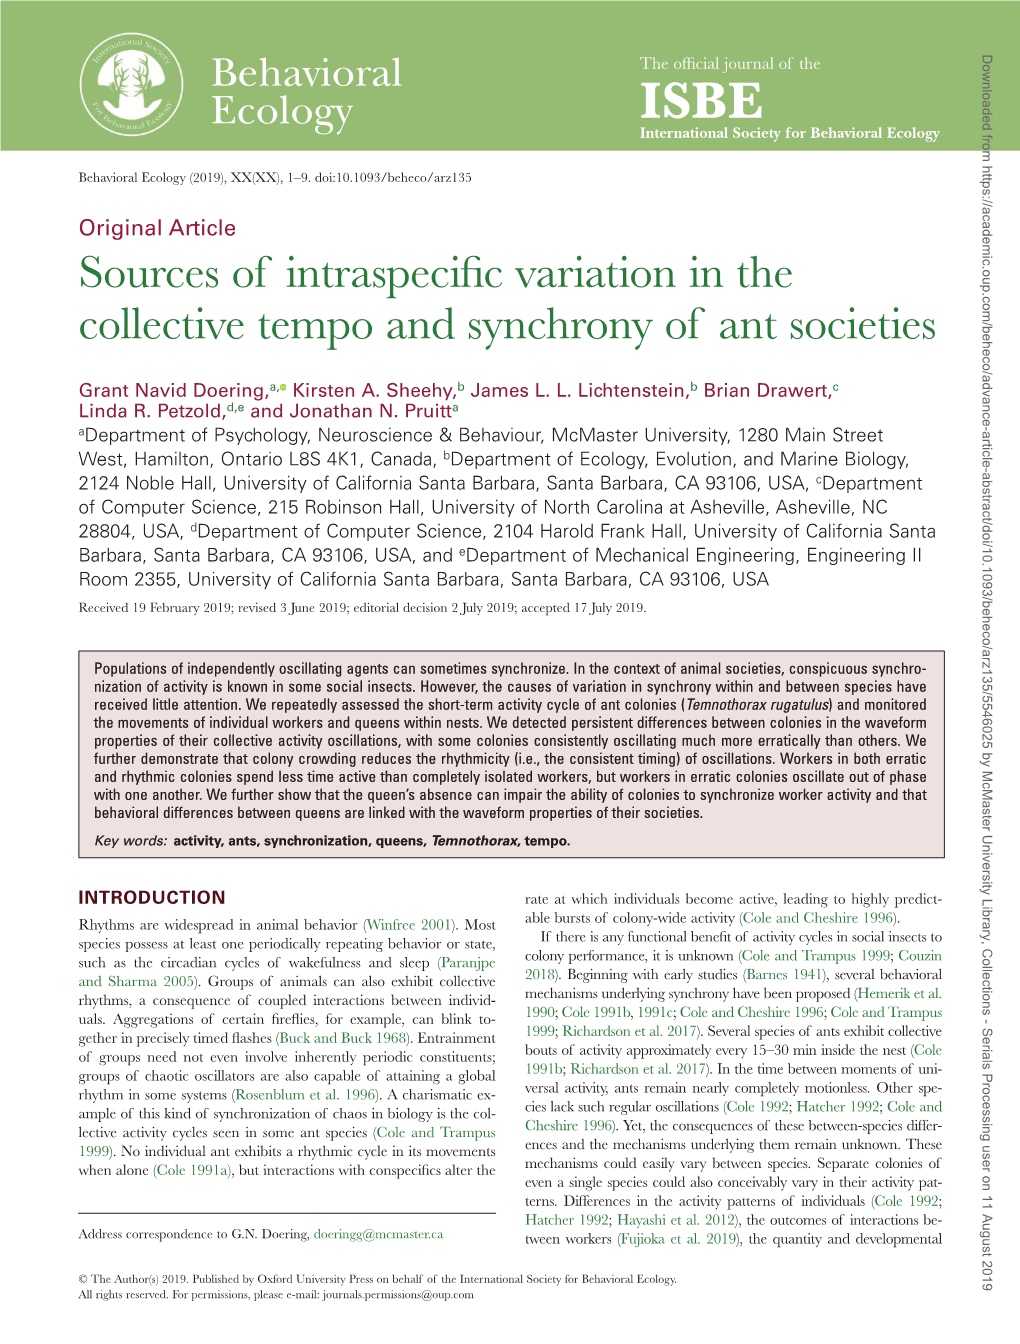 Sources of Intraspecific Variation in the Collective Tempo and Synchrony of Ant Societies